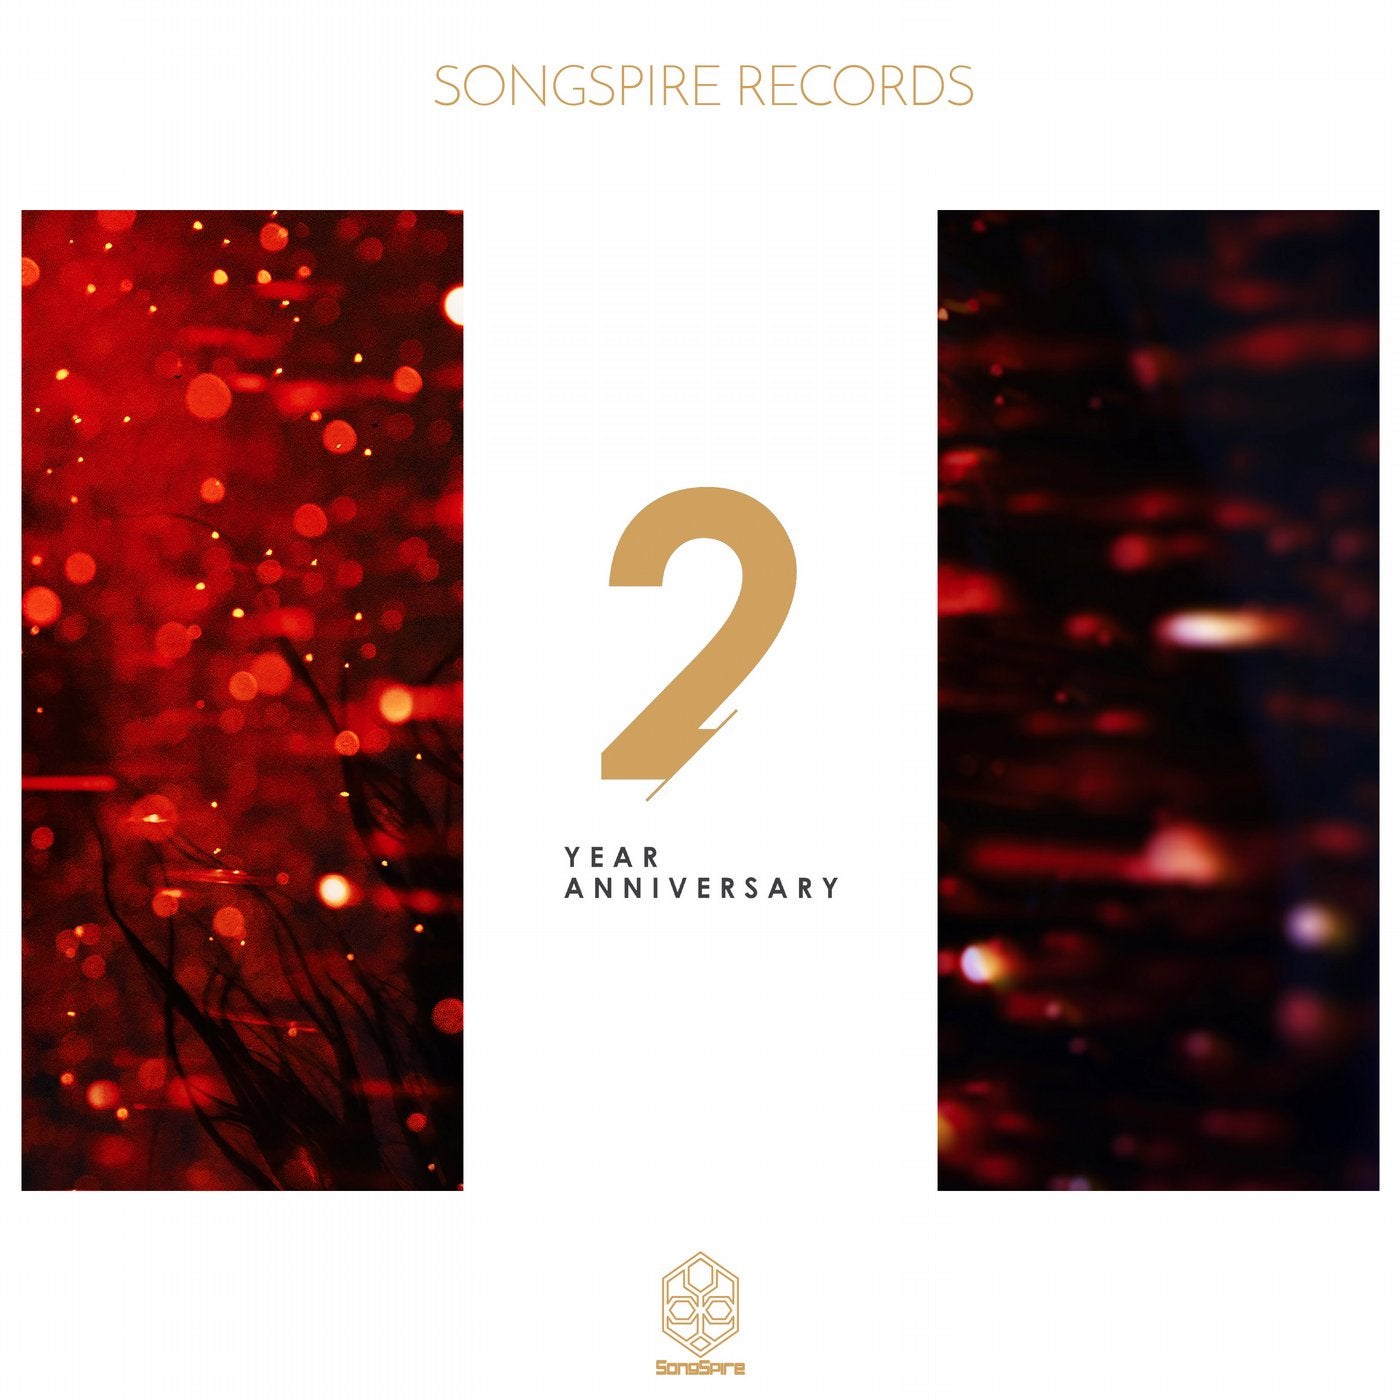 Songspire Records 2 Year Anniversary